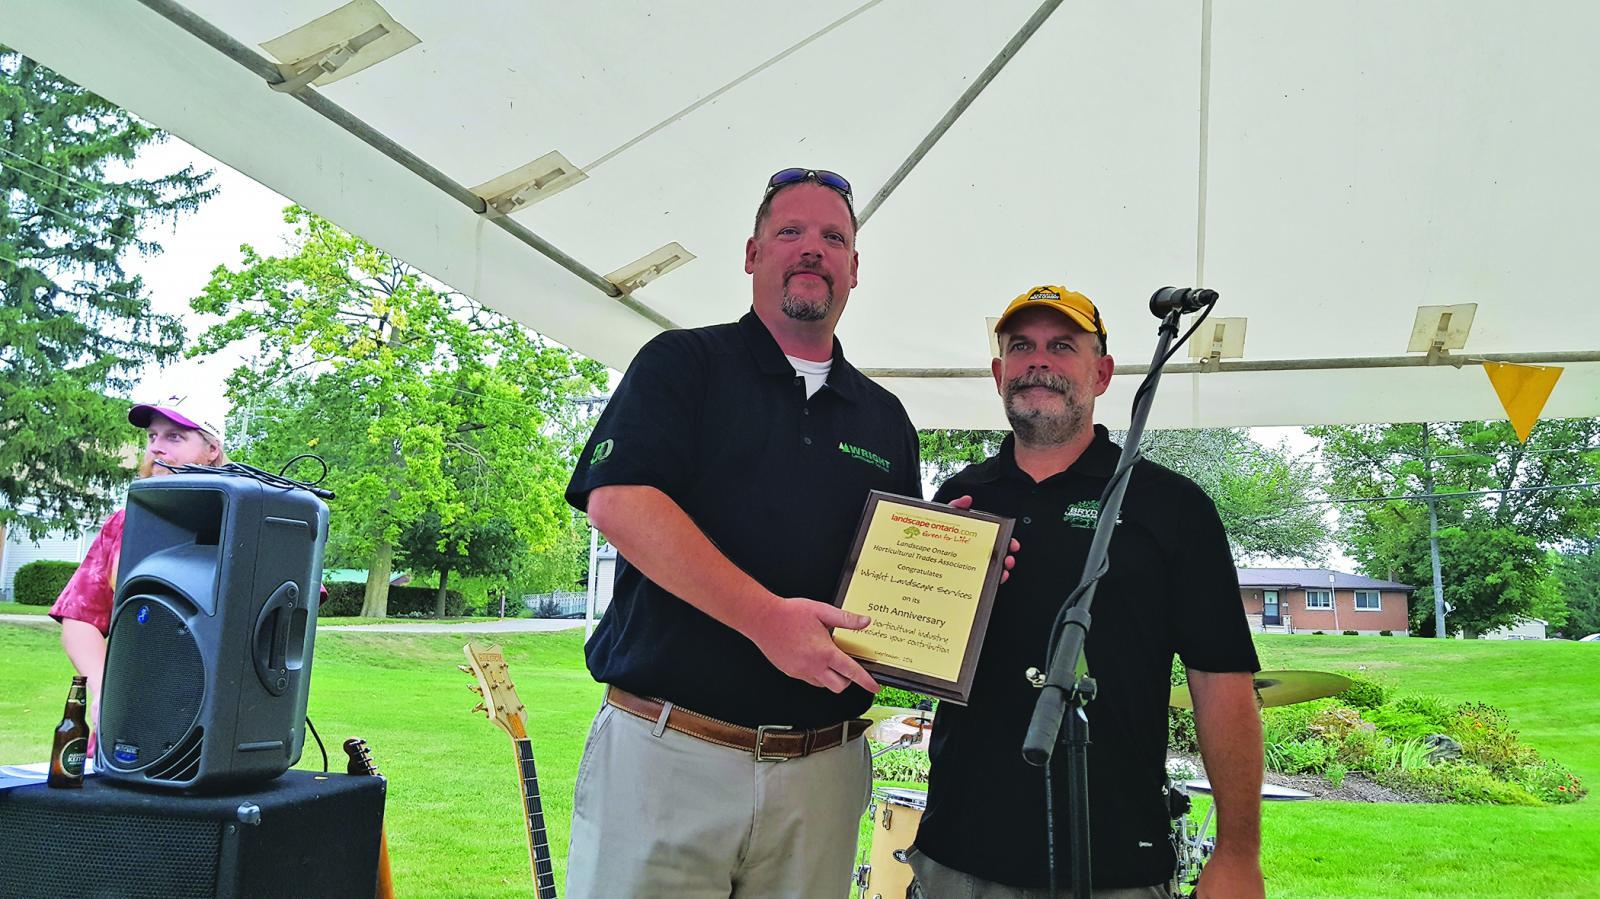 Dave Wright (left) accepts a plaque from LO President Paul Brydges.